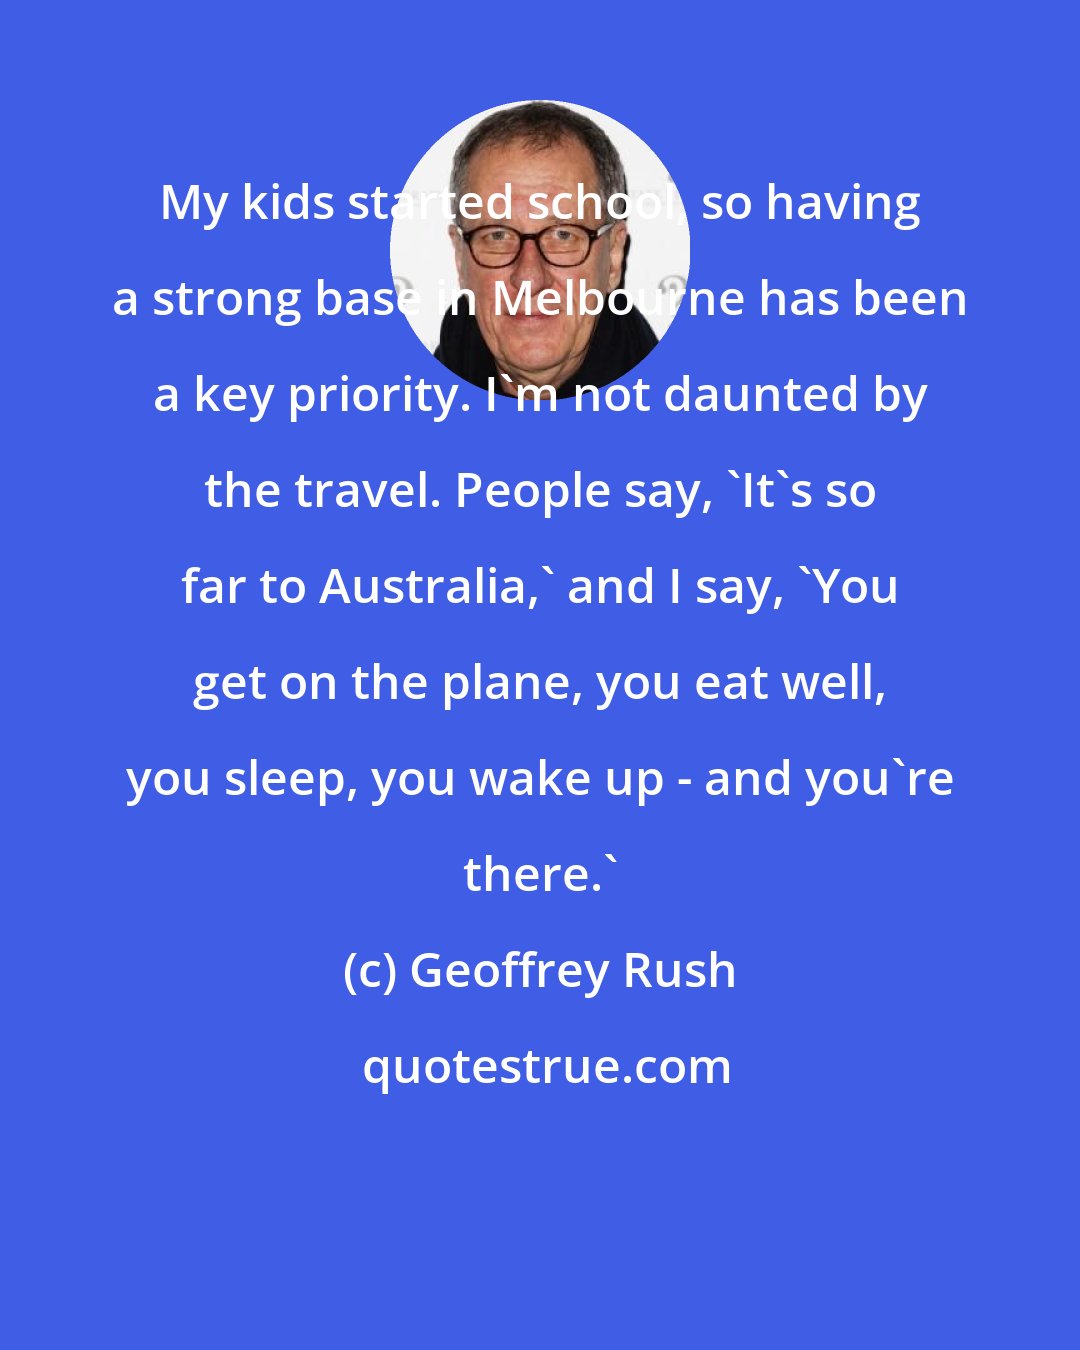 Geoffrey Rush: My kids started school, so having a strong base in Melbourne has been a key priority. I'm not daunted by the travel. People say, 'It's so far to Australia,' and I say, 'You get on the plane, you eat well, you sleep, you wake up - and you're there.'